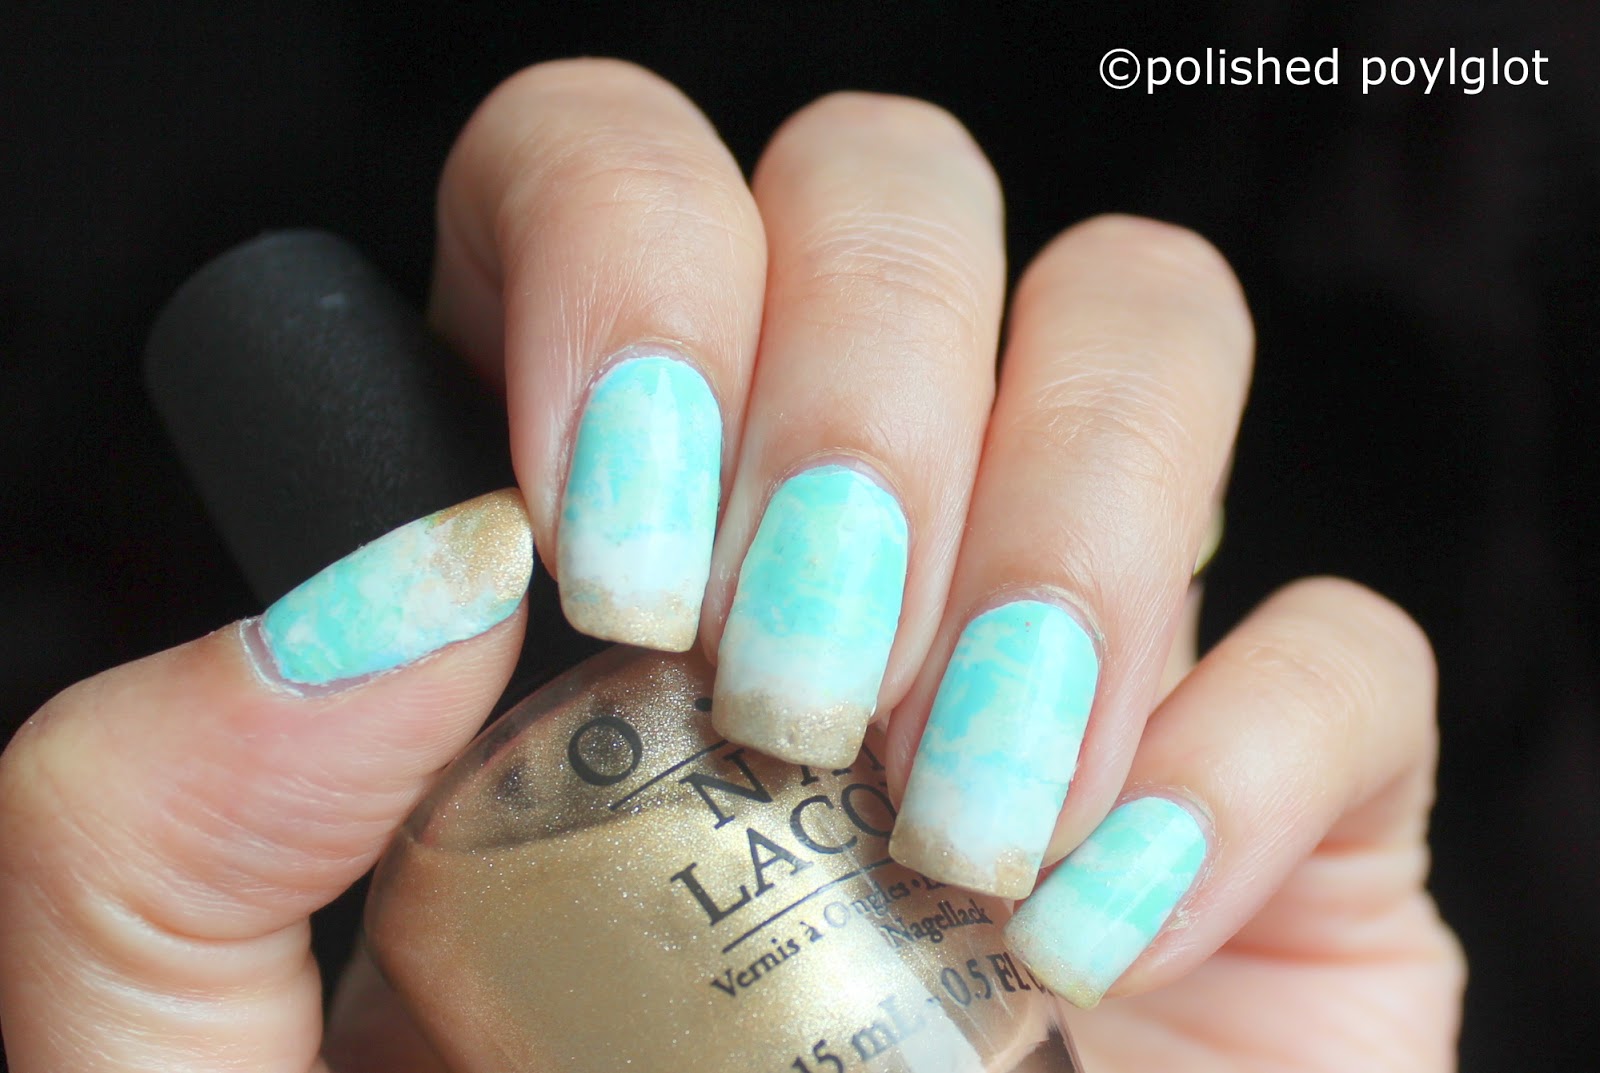 5. Easy Beach Vacation Nails - wide 3